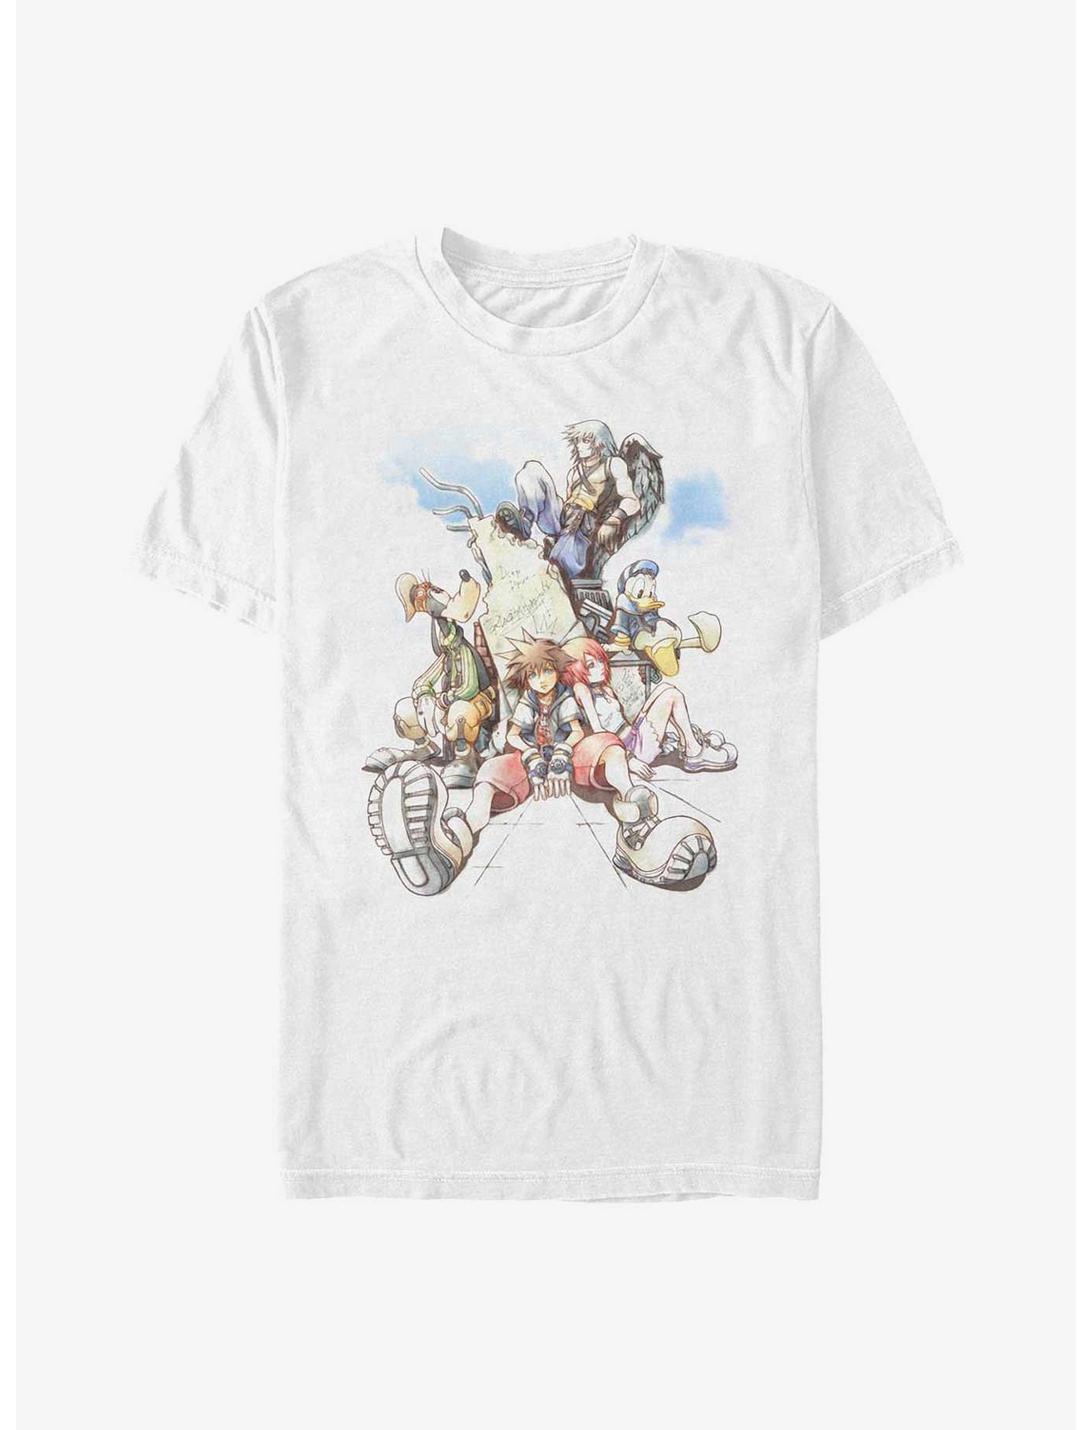 Extra Soft Disney Kingdom Hearts Group In The Clouds T-Shirt, WHITE, hi-res